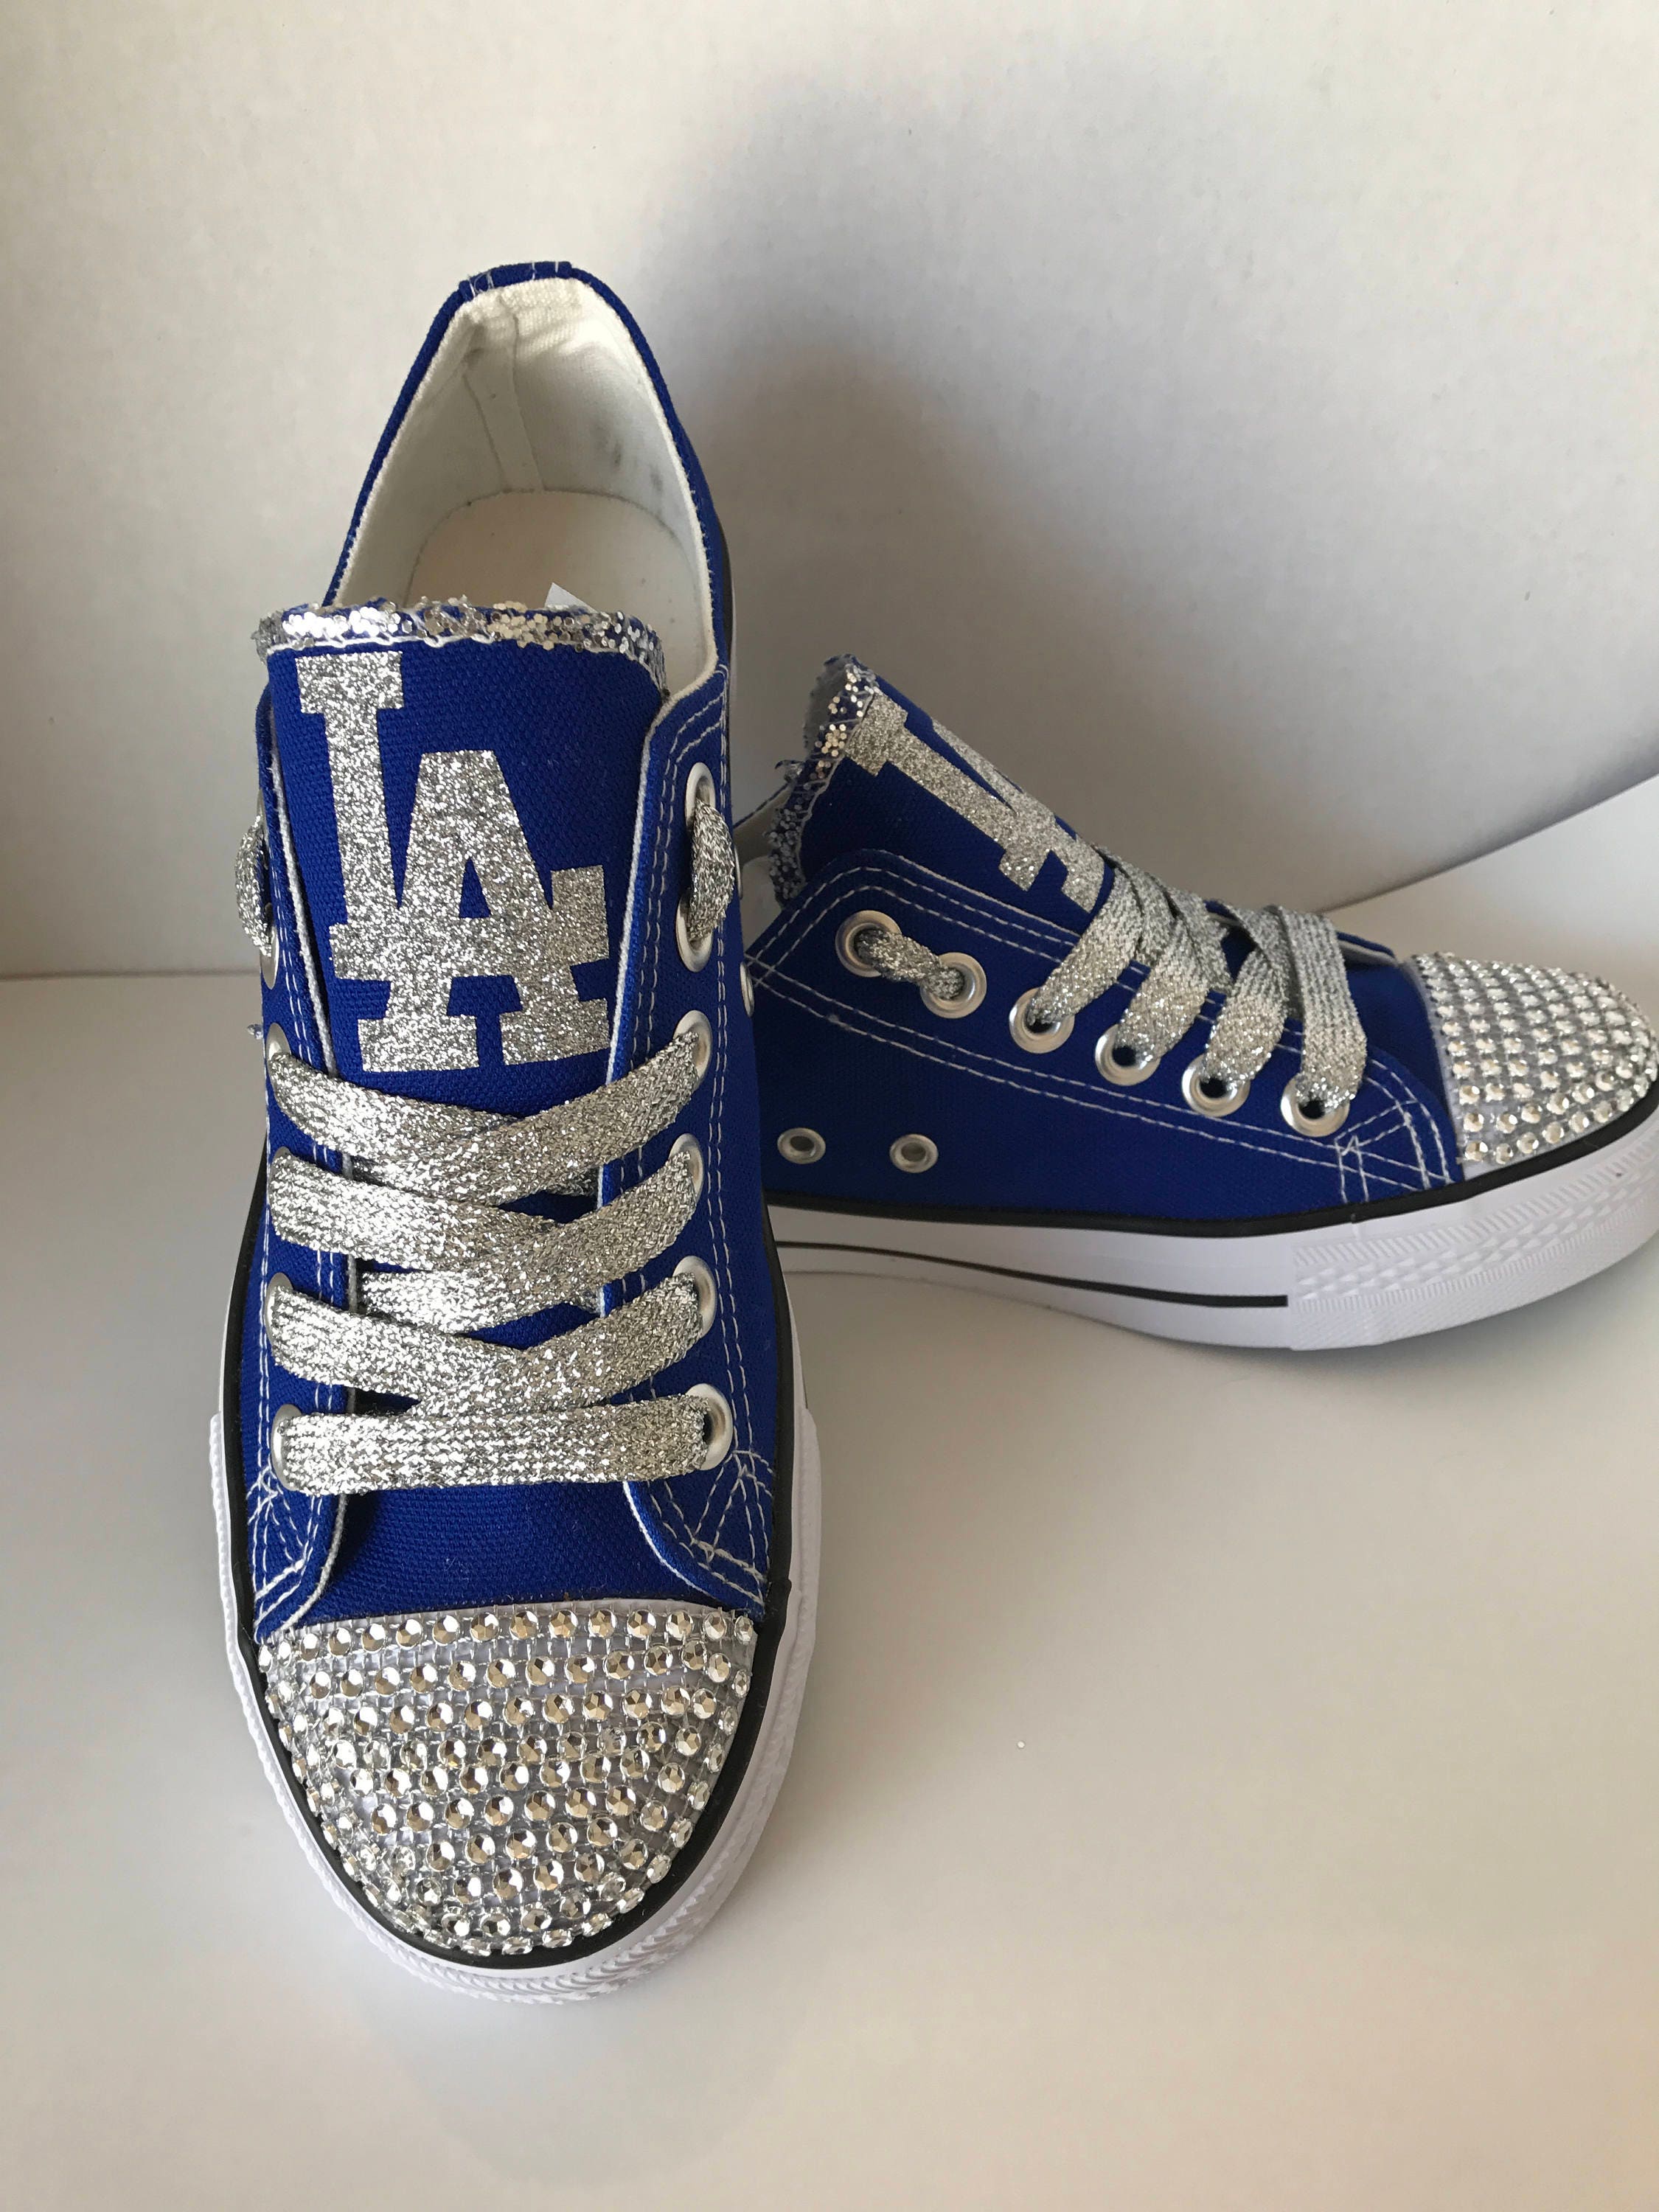 Los Angeles Dodgers Bling Glitter Tennis Shoes | Etsy